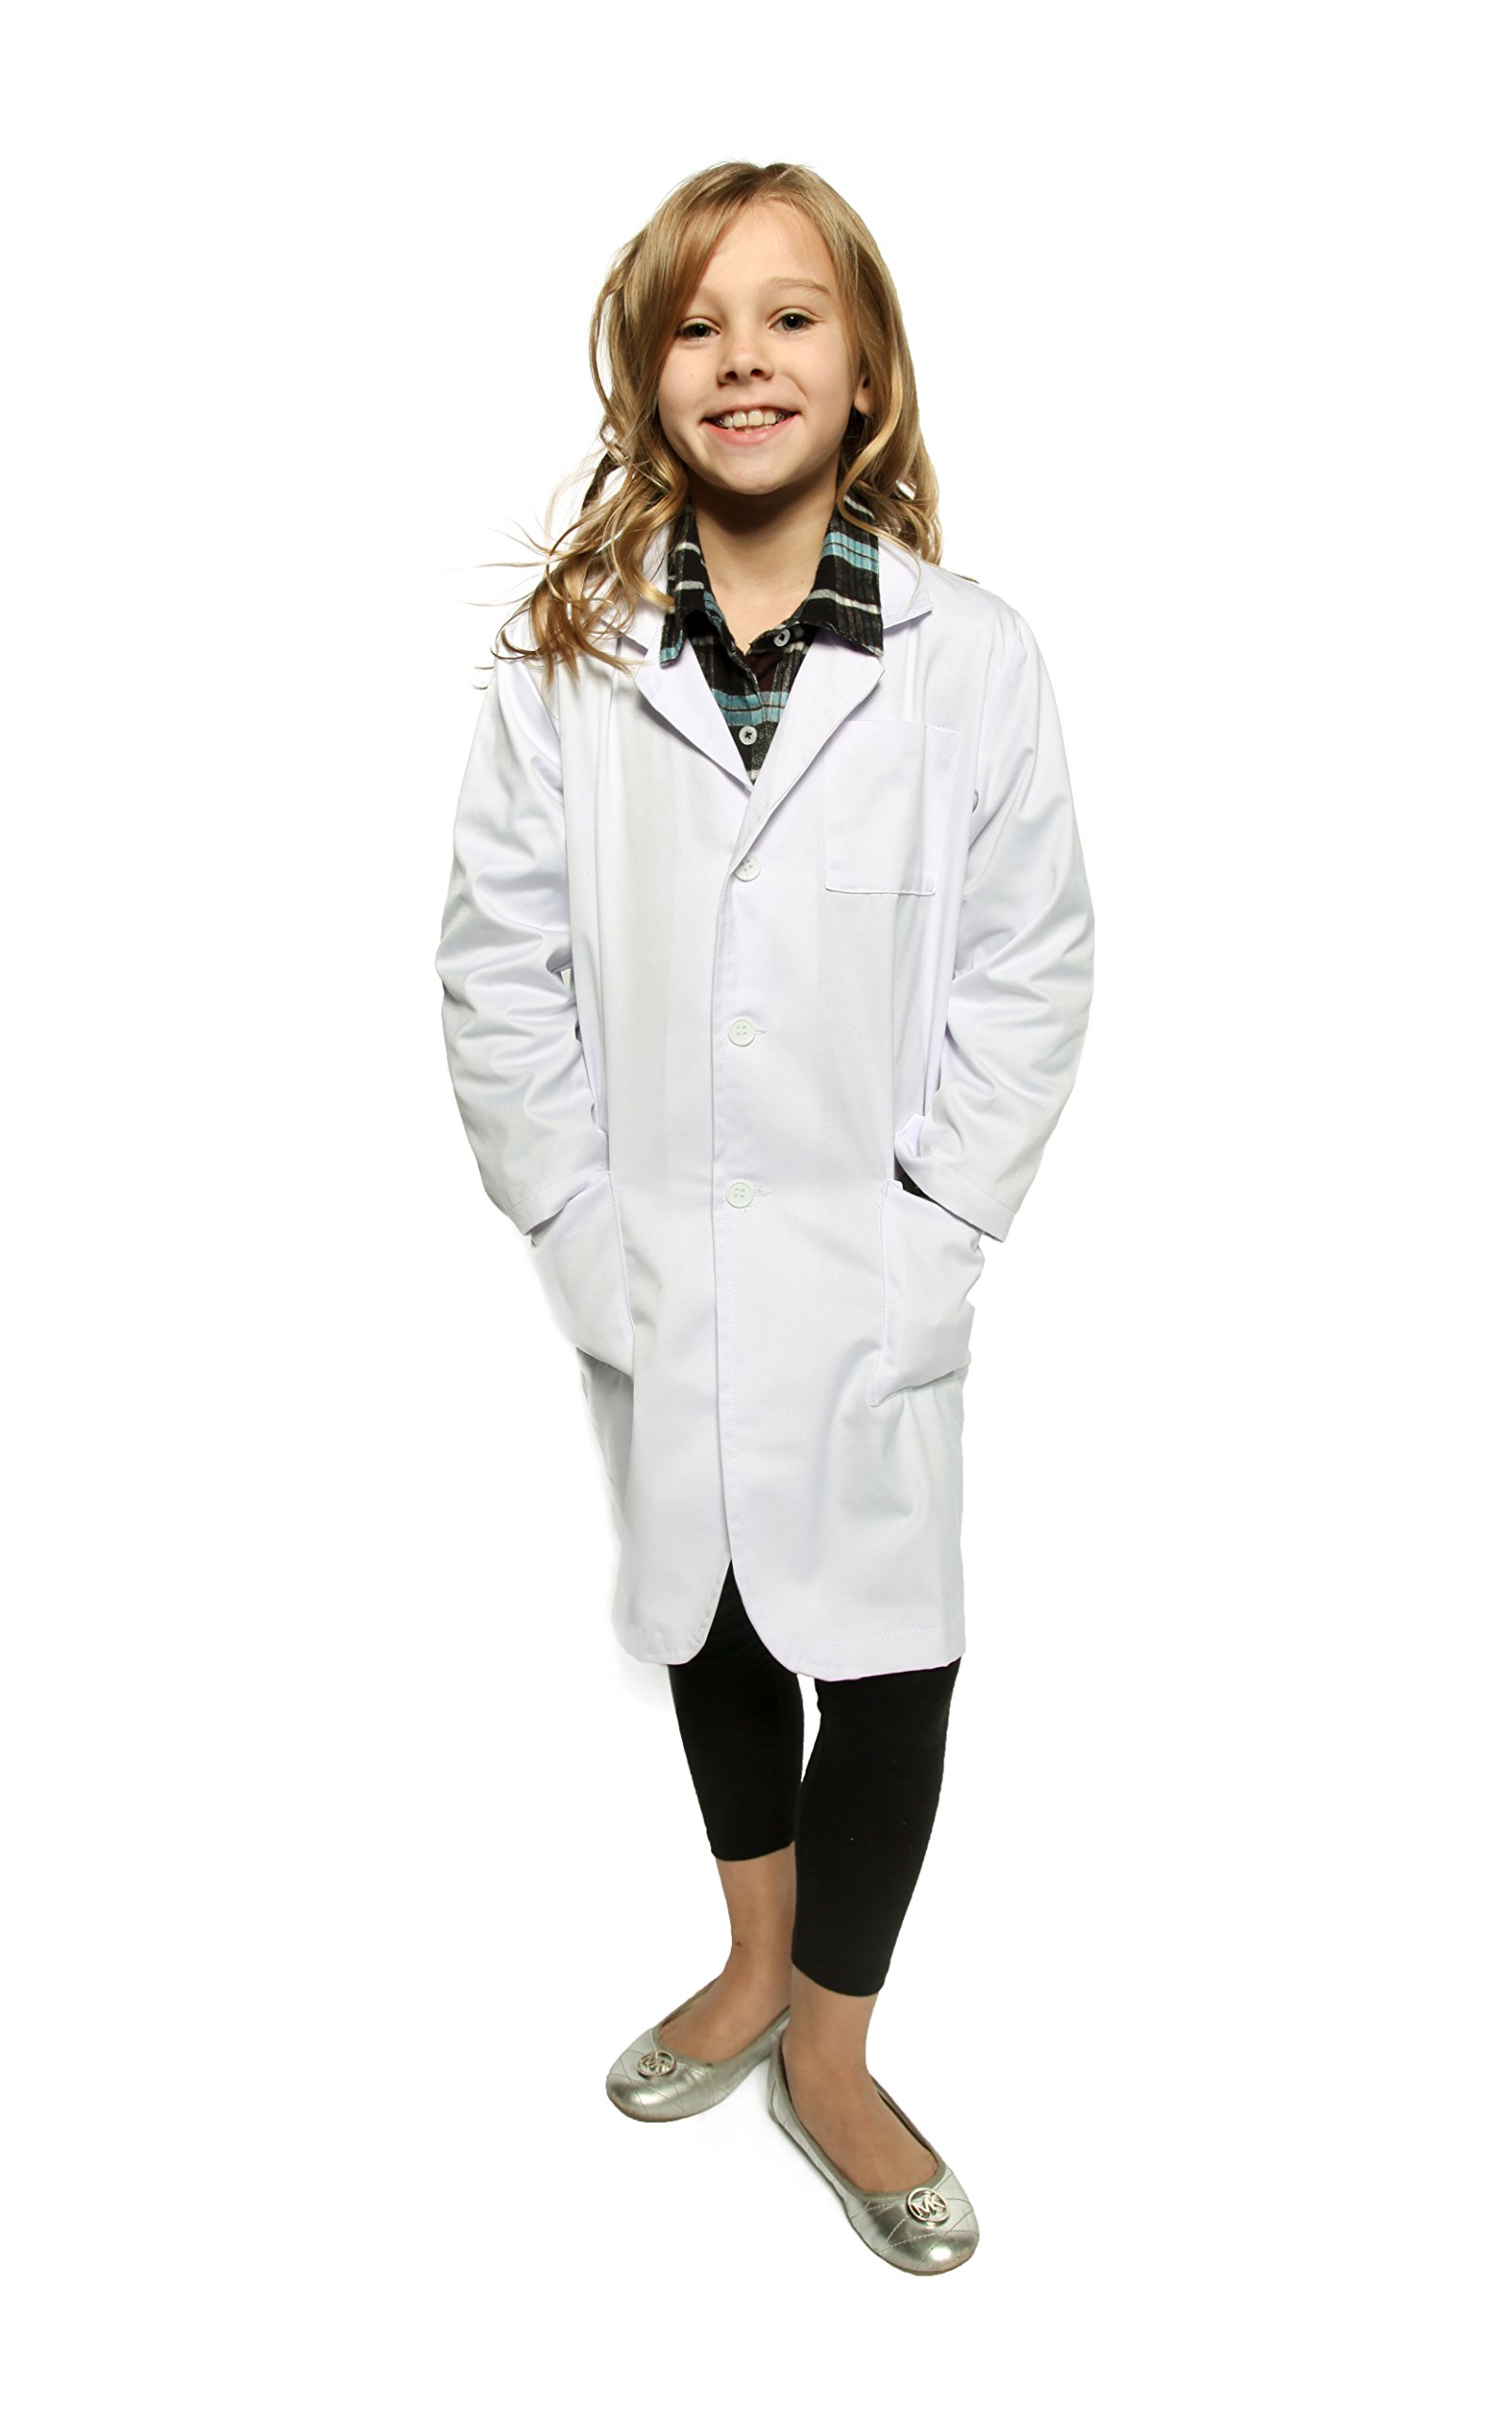 Book Cover Working Class Kid's Lab Coat Durable Lab Coats for Kid Scientists or Doctors Ages 6-8 White